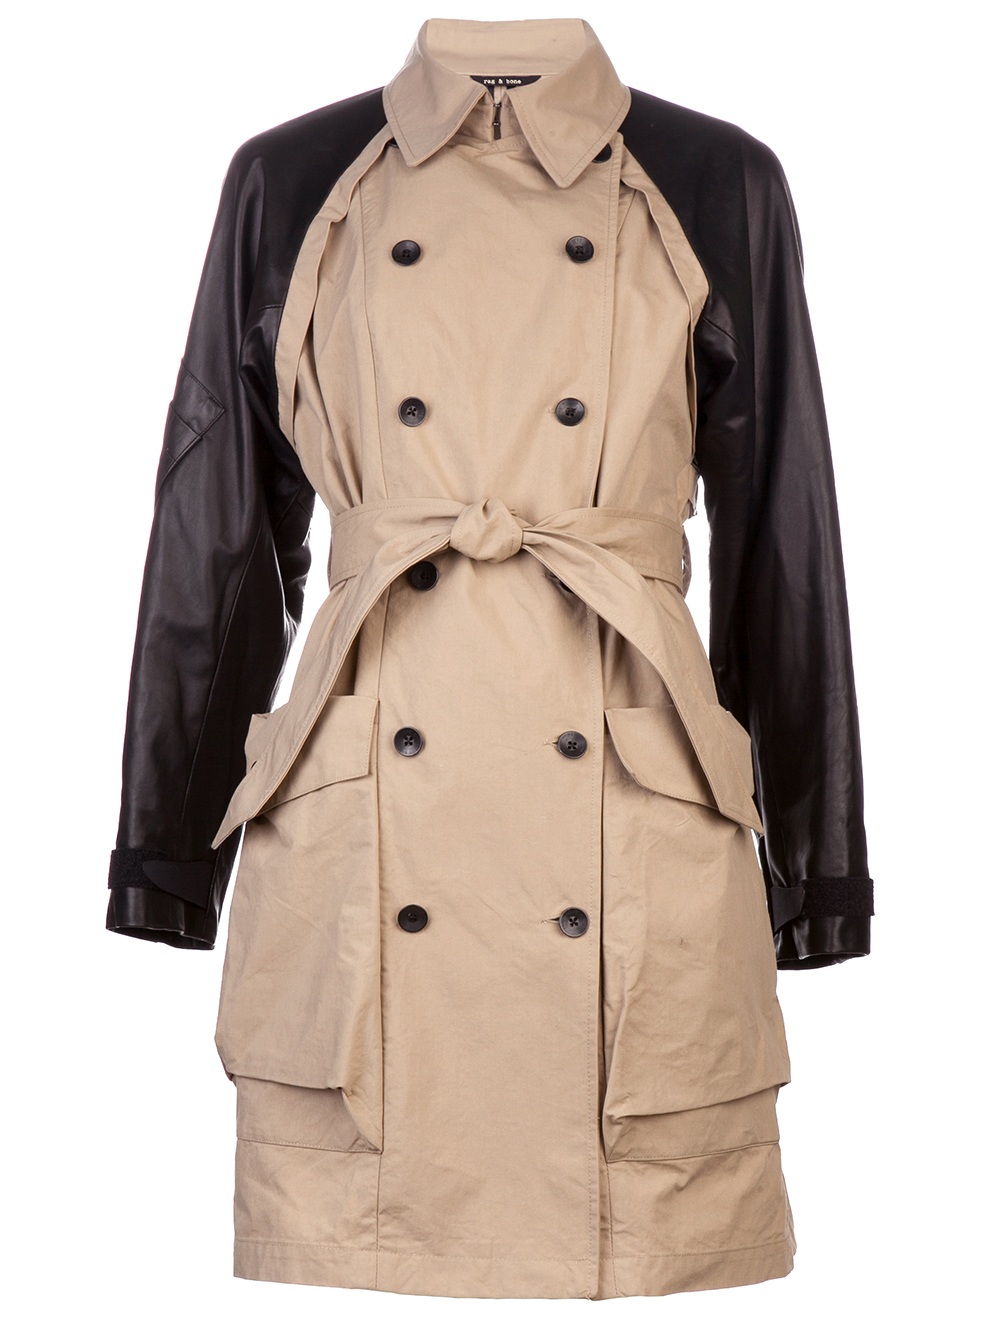 Rag & bone Khaki Trench Coat With Leather Sleeves in Natural | Lyst